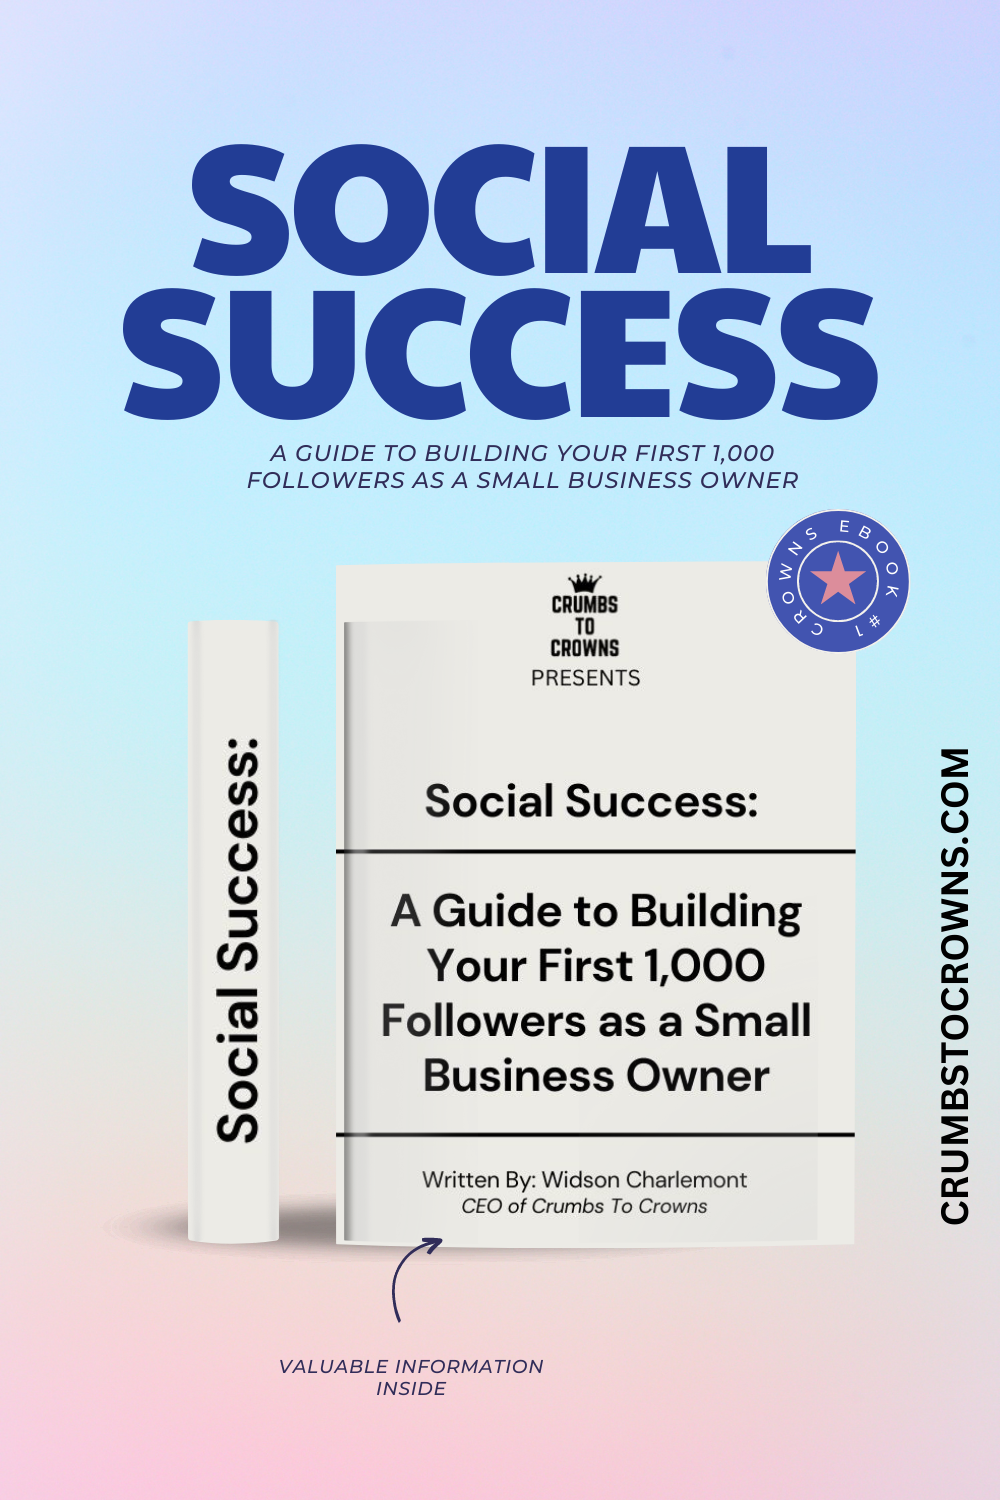 Social Success: A Guide to Building Your First 1,000 Followers as a Small Business Owner (EBOOK)